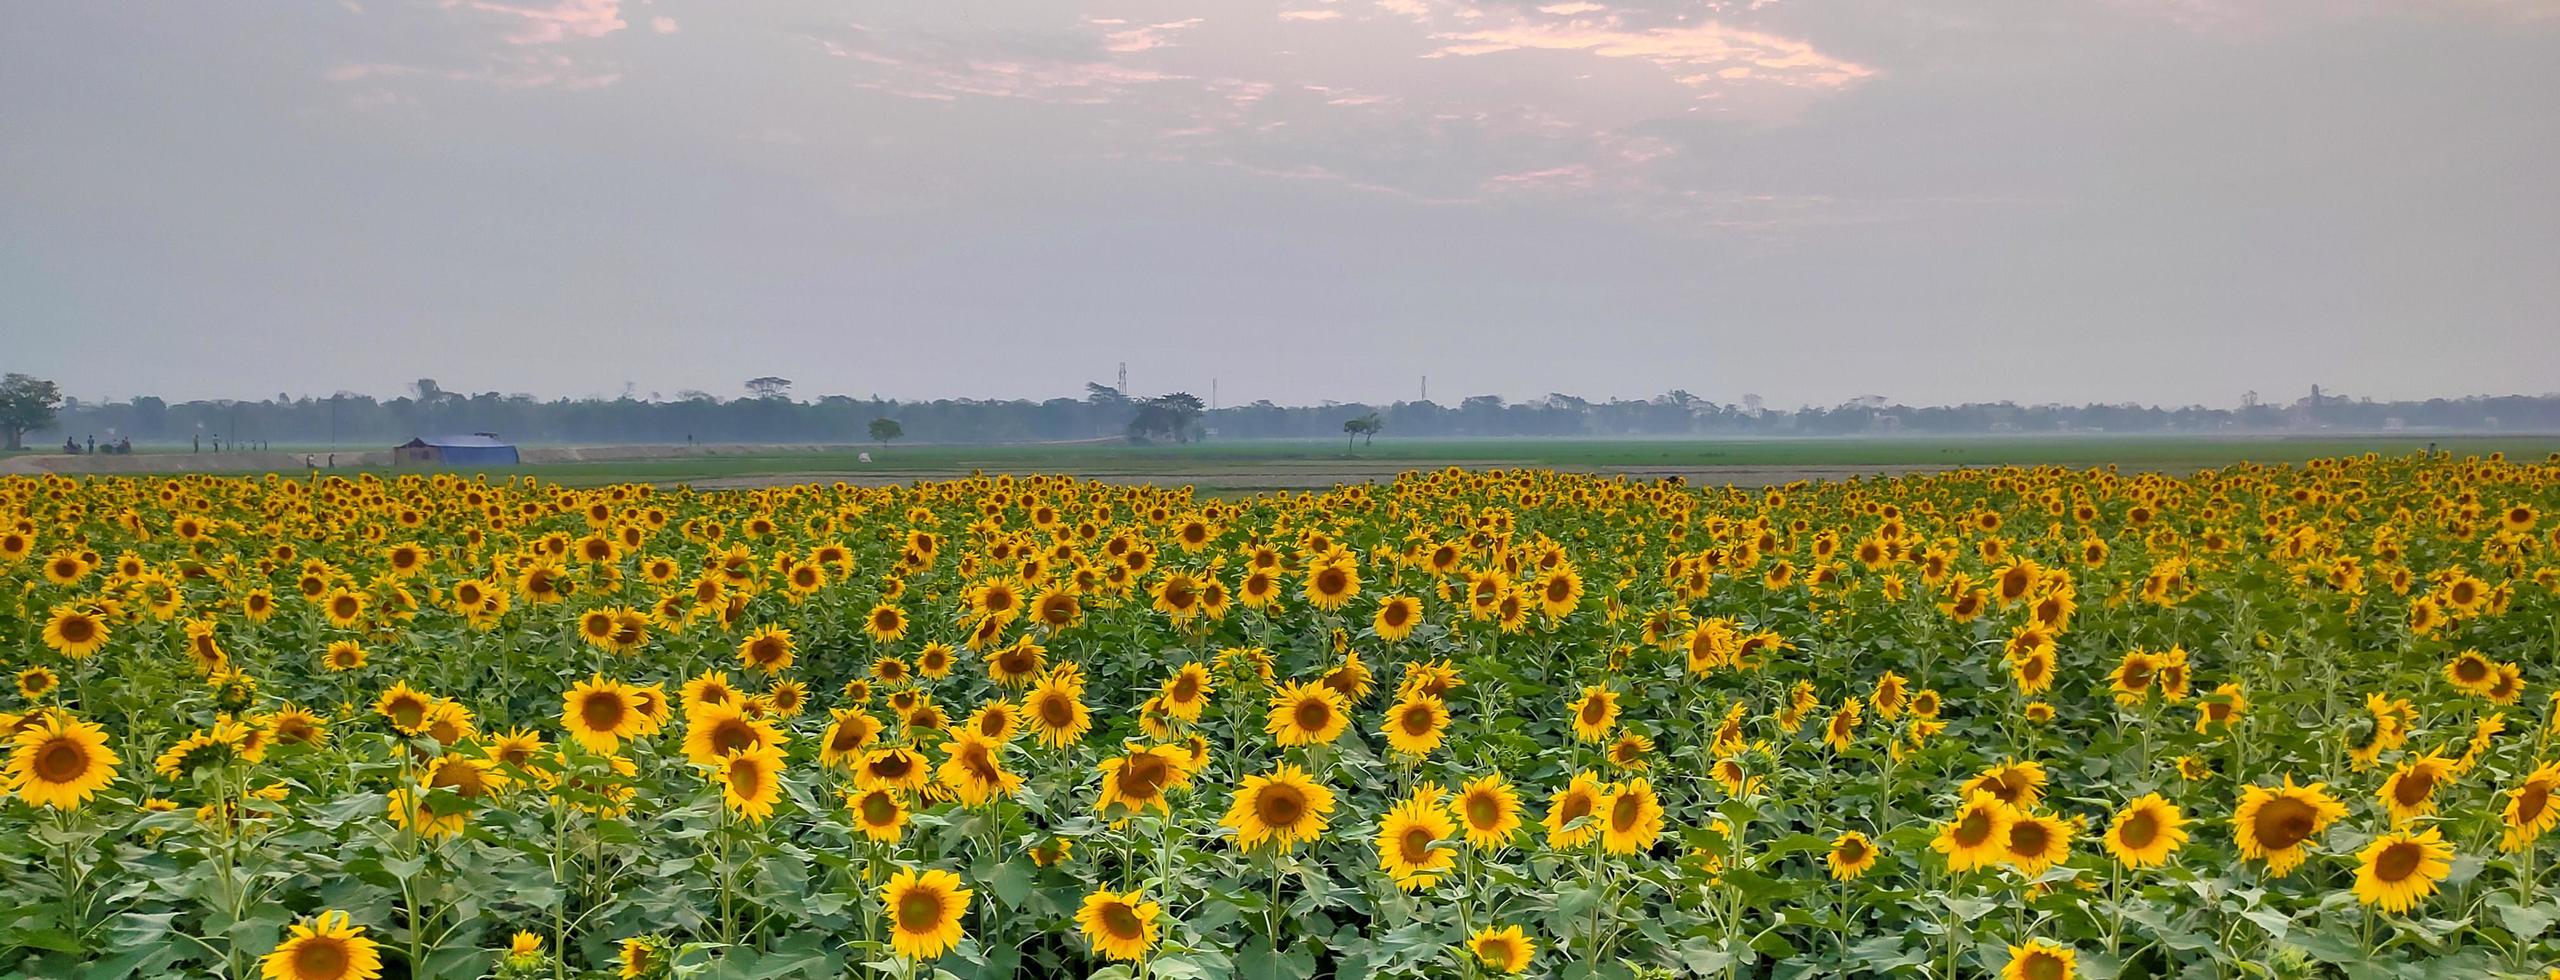 Sunflower fields and village, Shot of a sunflower field in the summer, an image of a field of sunflowers photo